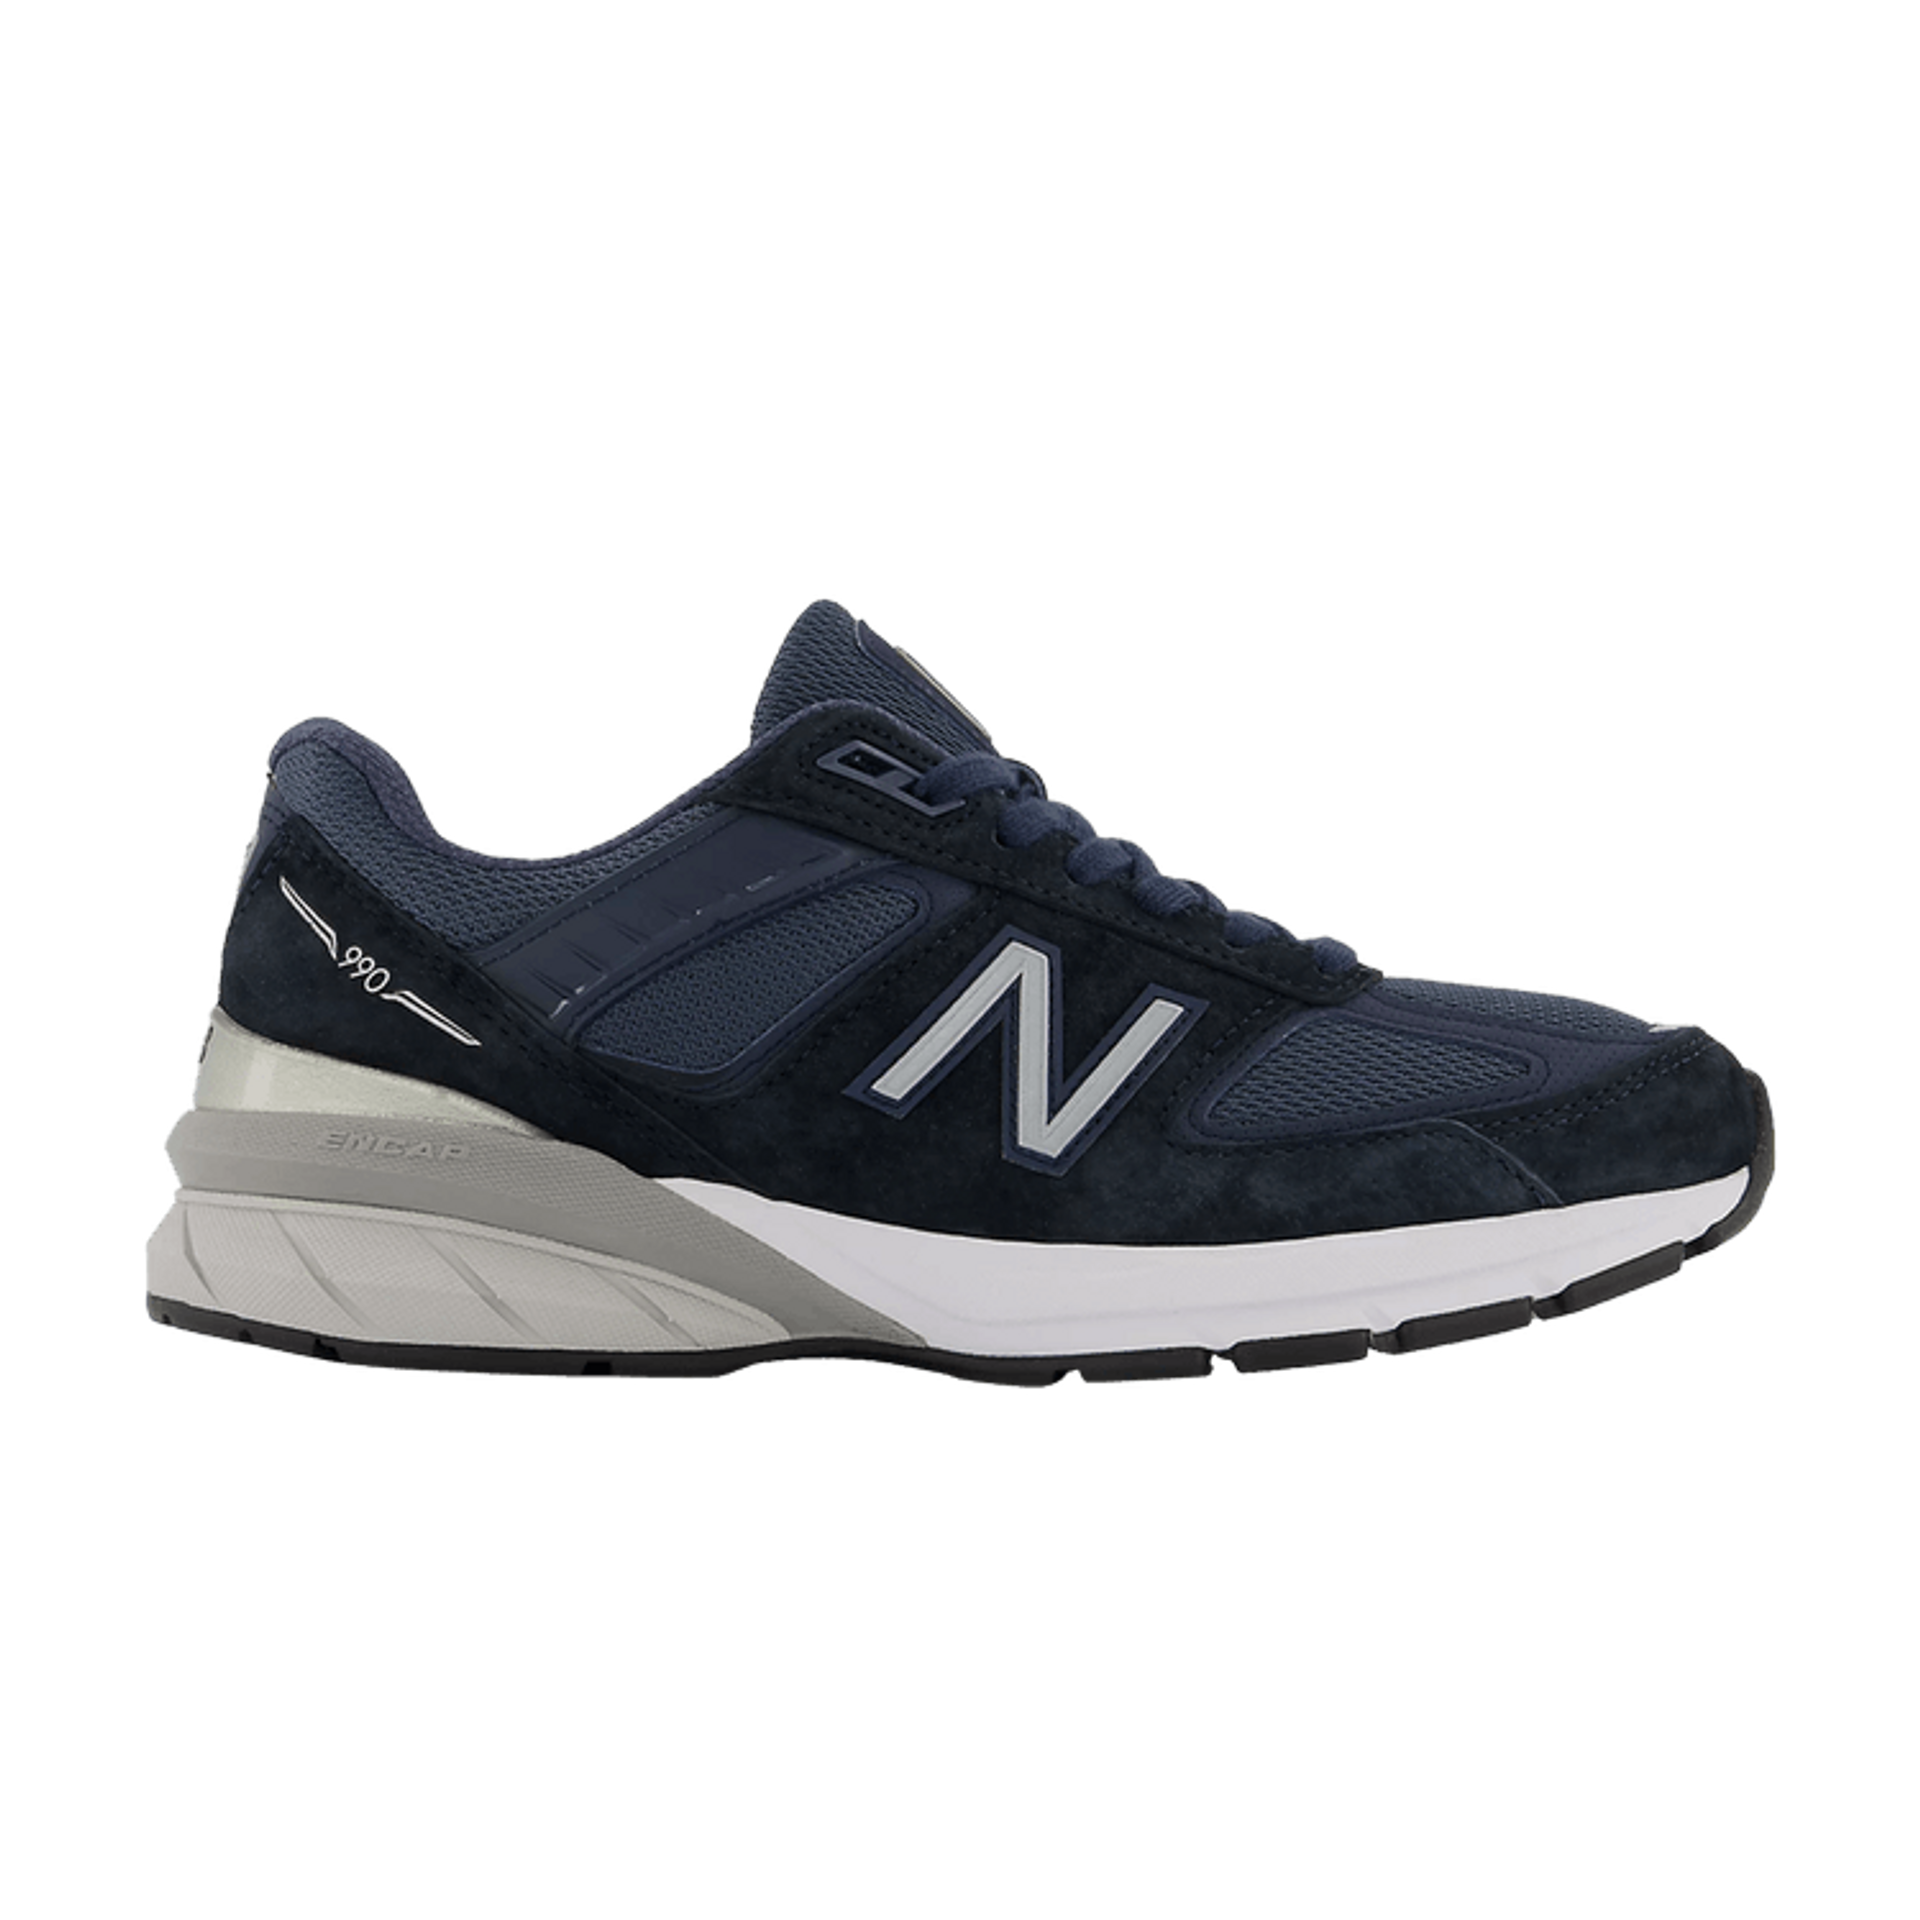 990v5 Made In USA 2A Wide 'Navy'